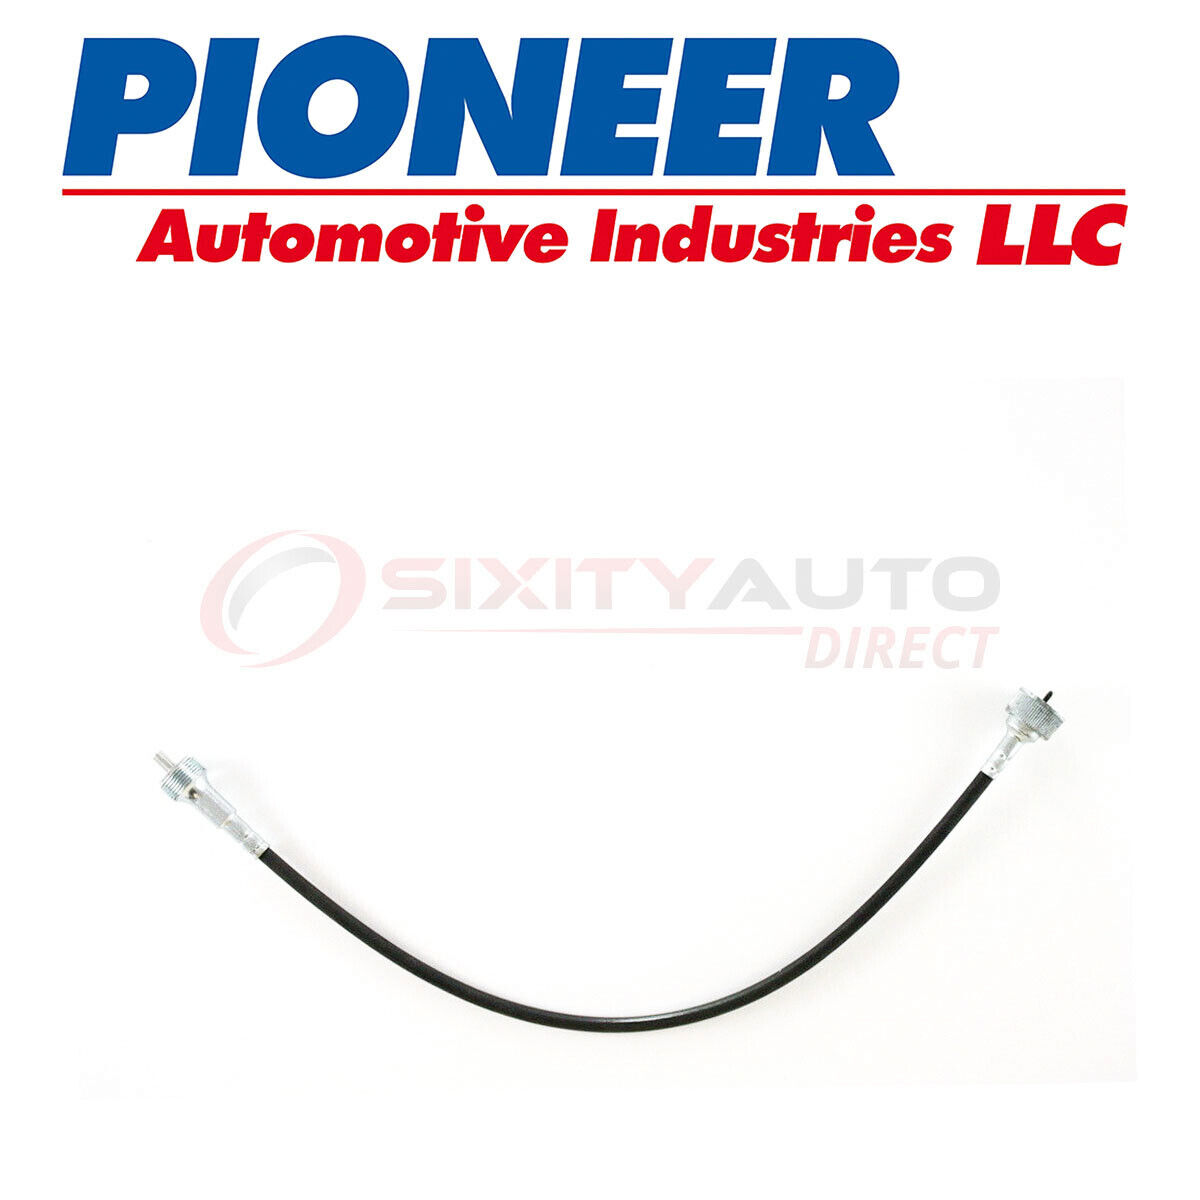 Pioneer Speedometer Cable for 1978-1984 Oldsmobile Cutlass Calais 3.8L 4.3L bl